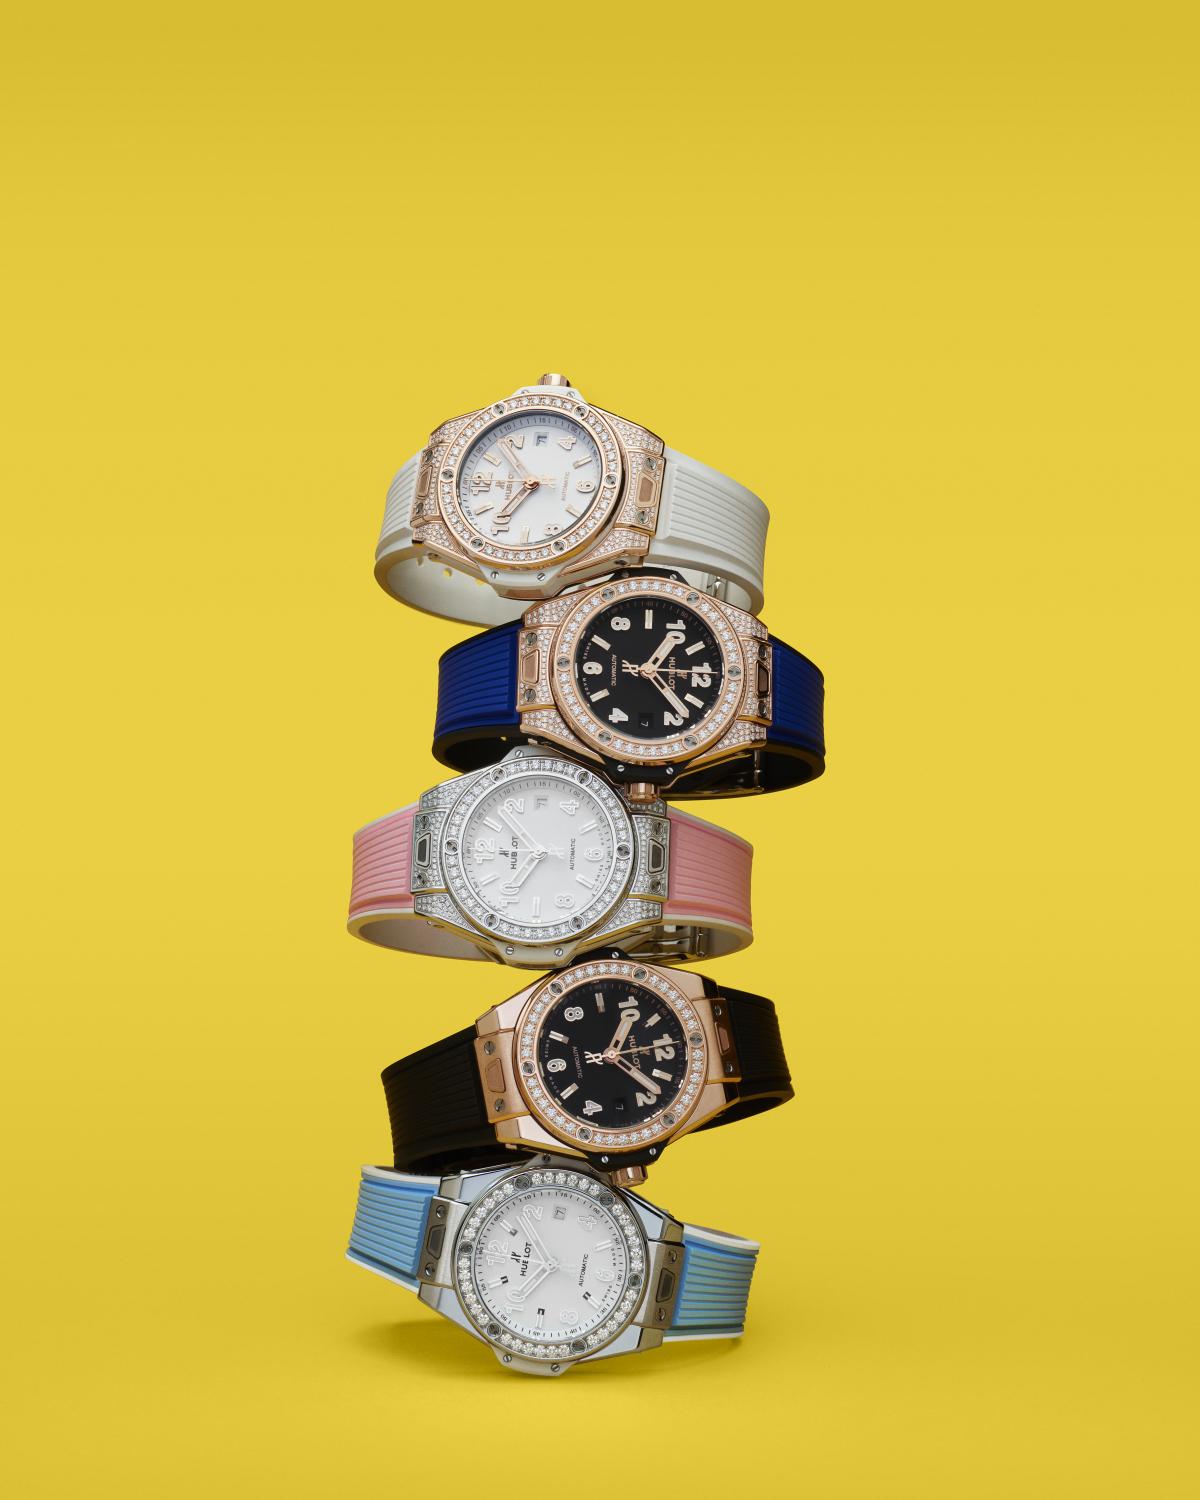 Lady Love: The Women’s Replica Watches UK That Made An Impact This Year